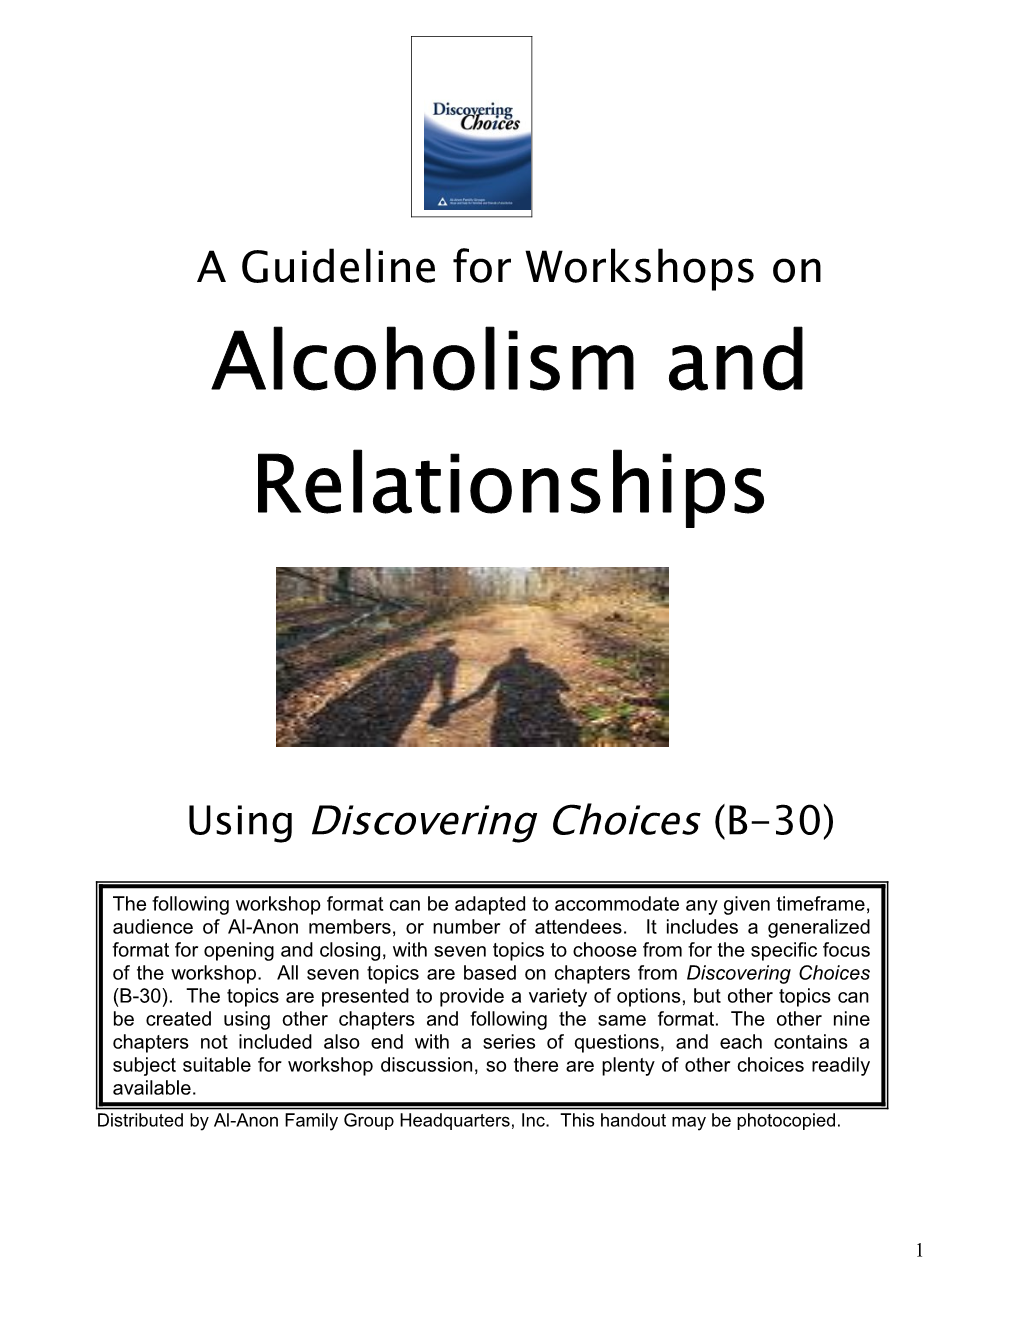 Alcoholism and Relationships